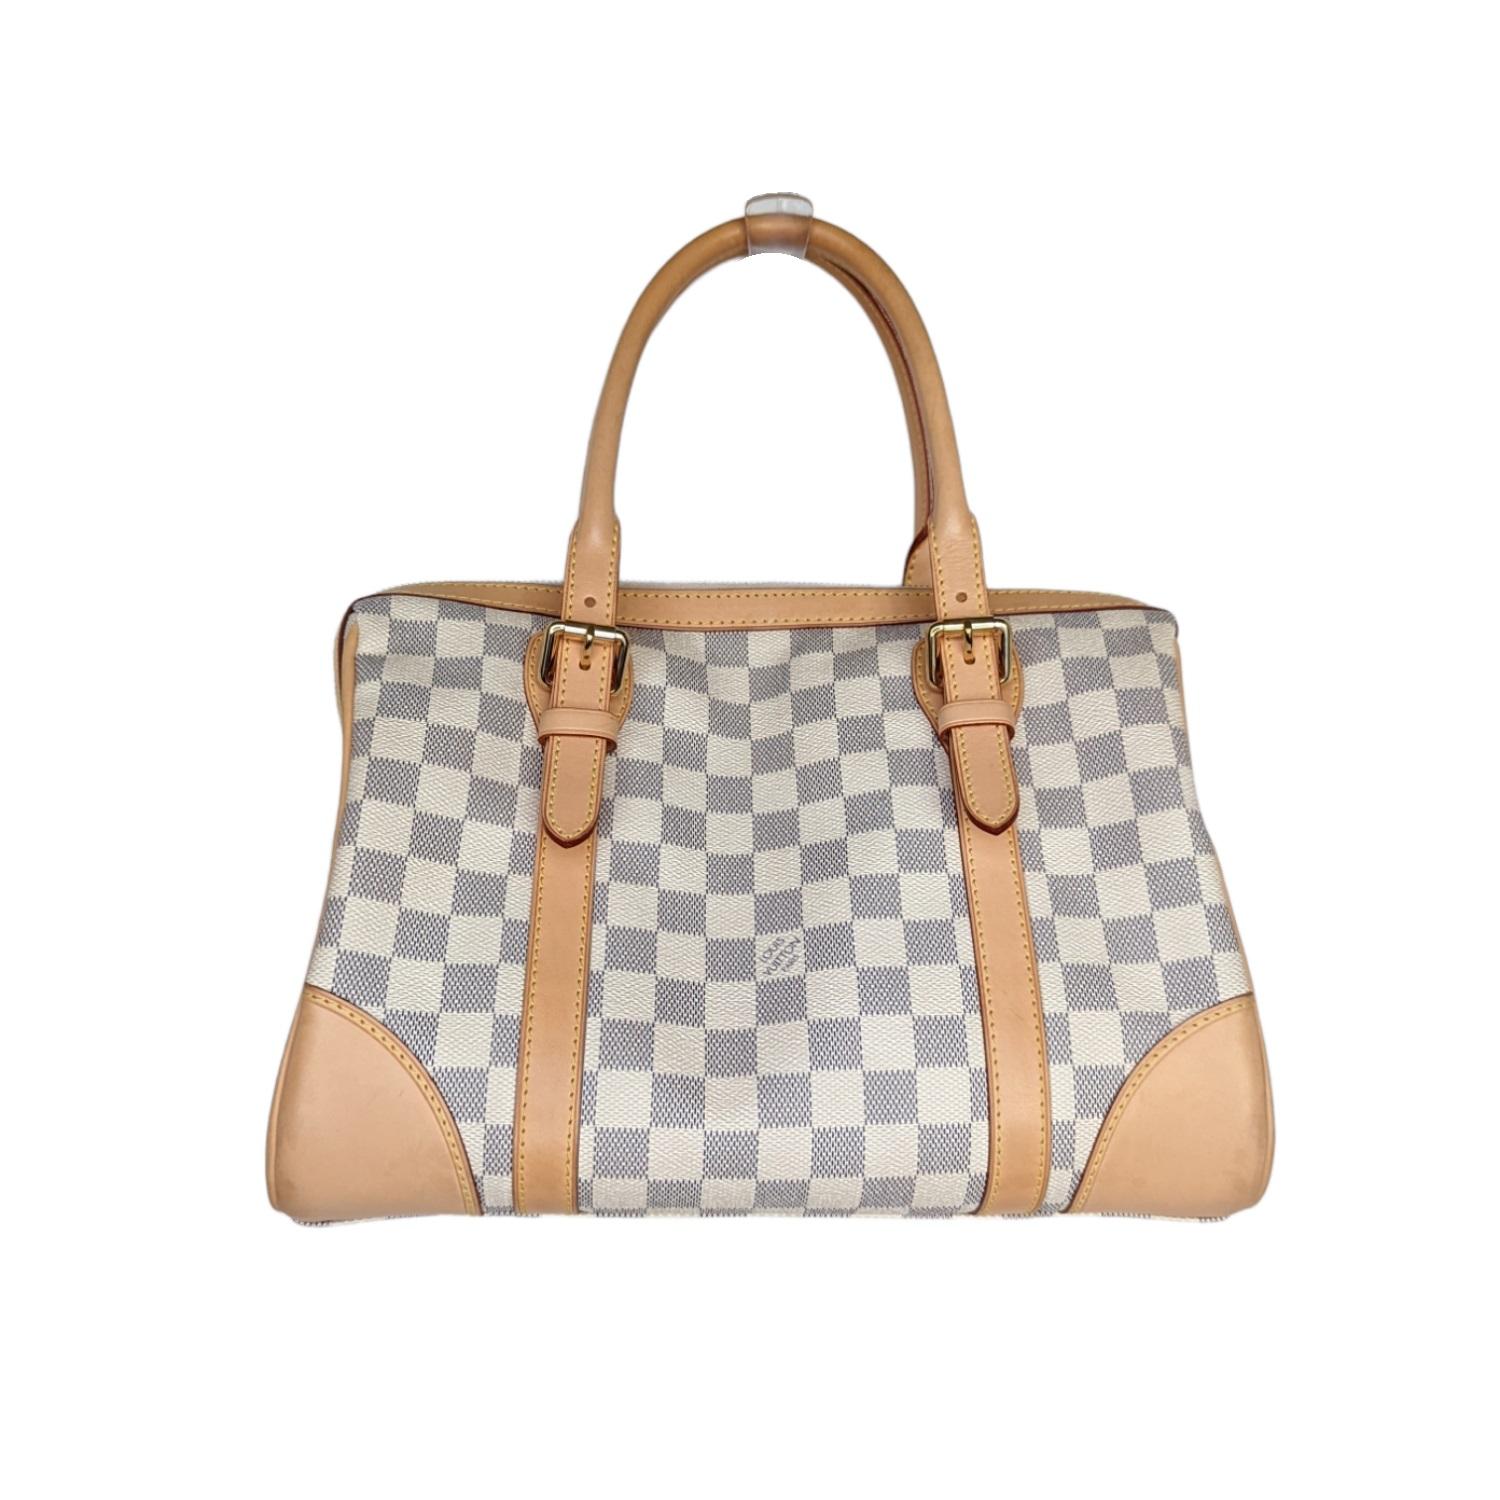 This stylish handbag is crafted of signature Damier checkered canvas in blue and white, with vachetta cowhide leather trim. The bag features adjustable rolled leather top handles, external side pockets and polished brass hardware, including a Louis